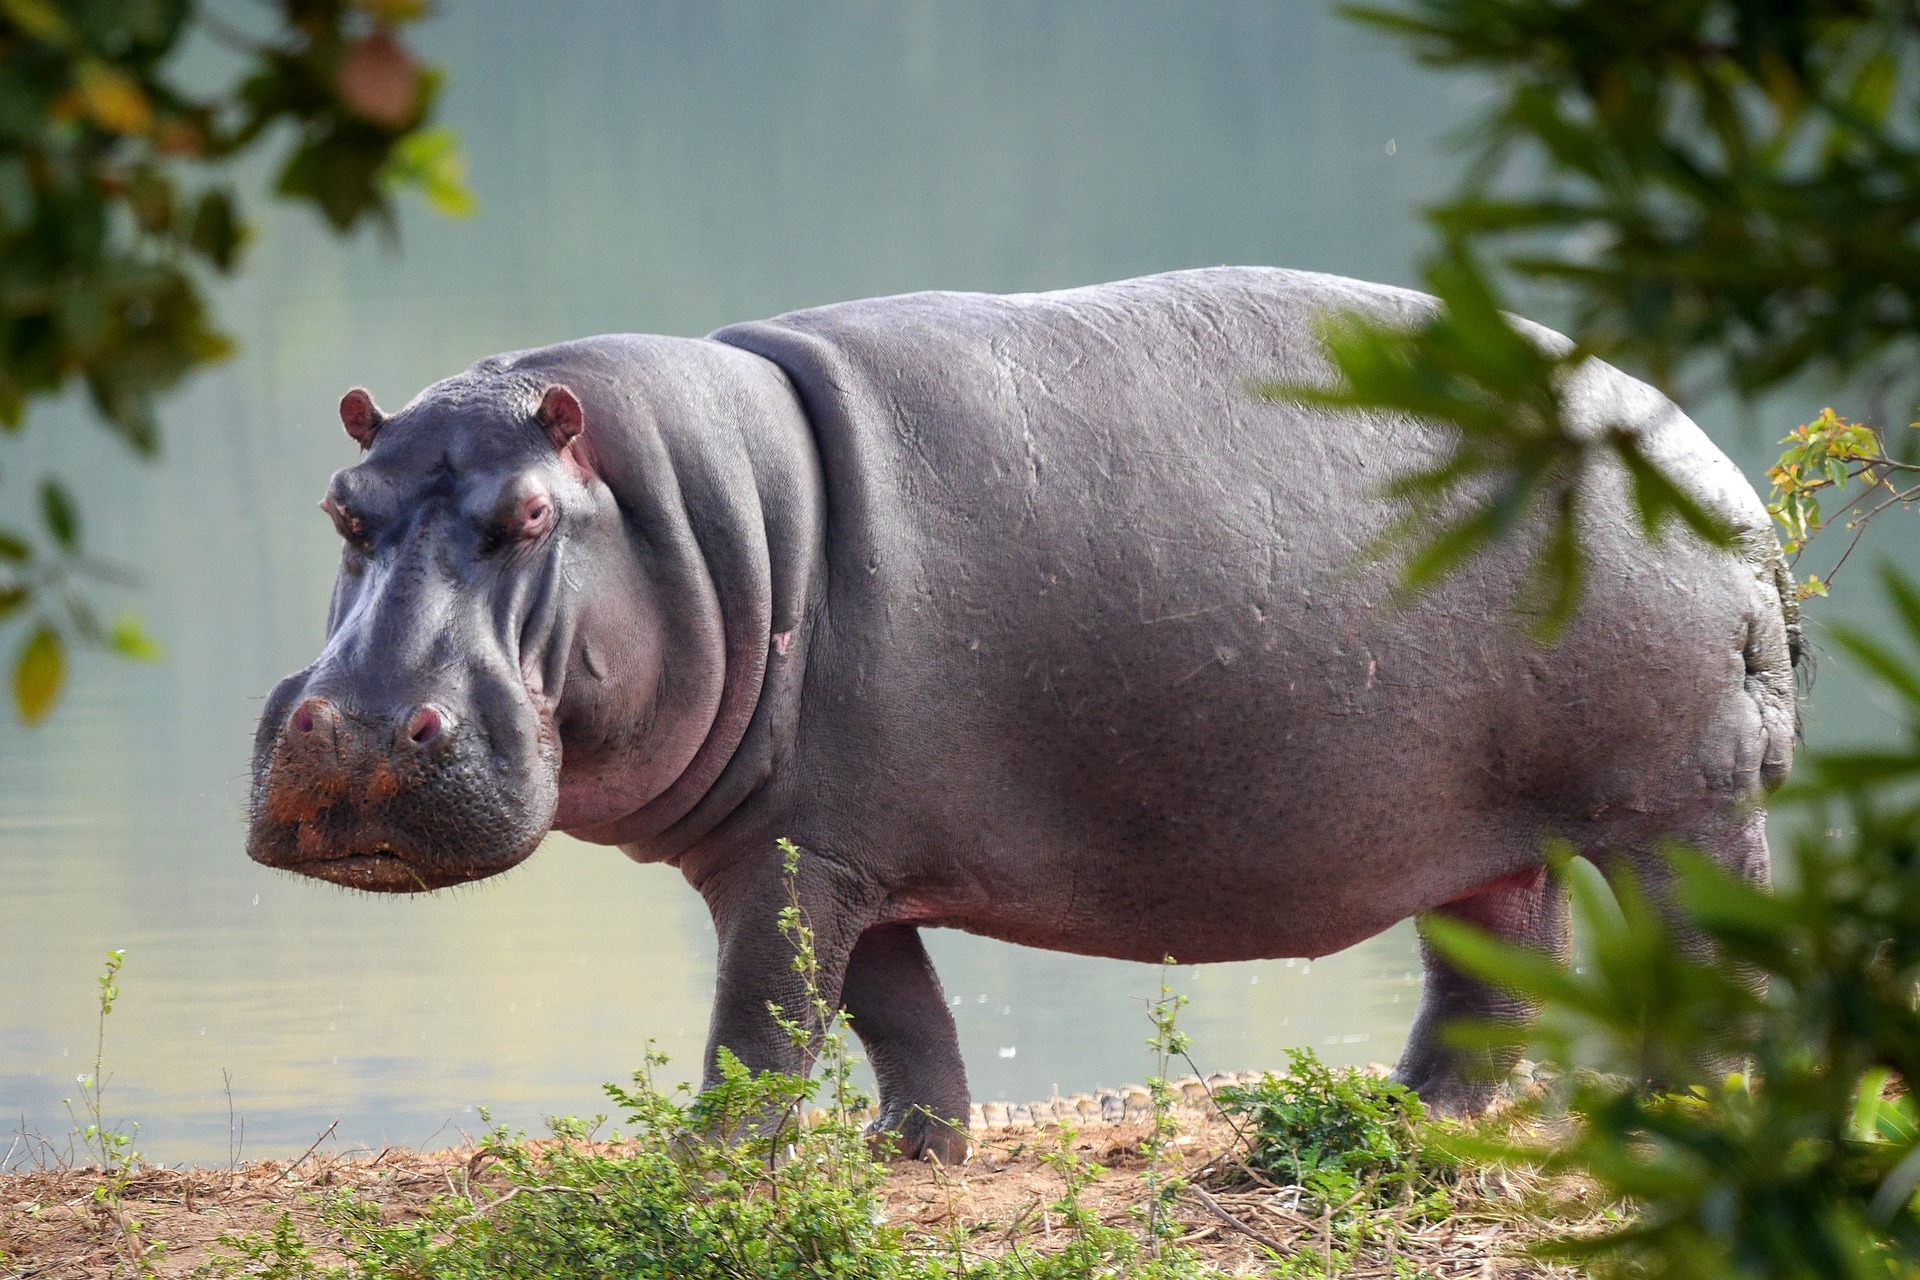 Confirmation of COVID-19 in Hippos at a Belgian Zoo